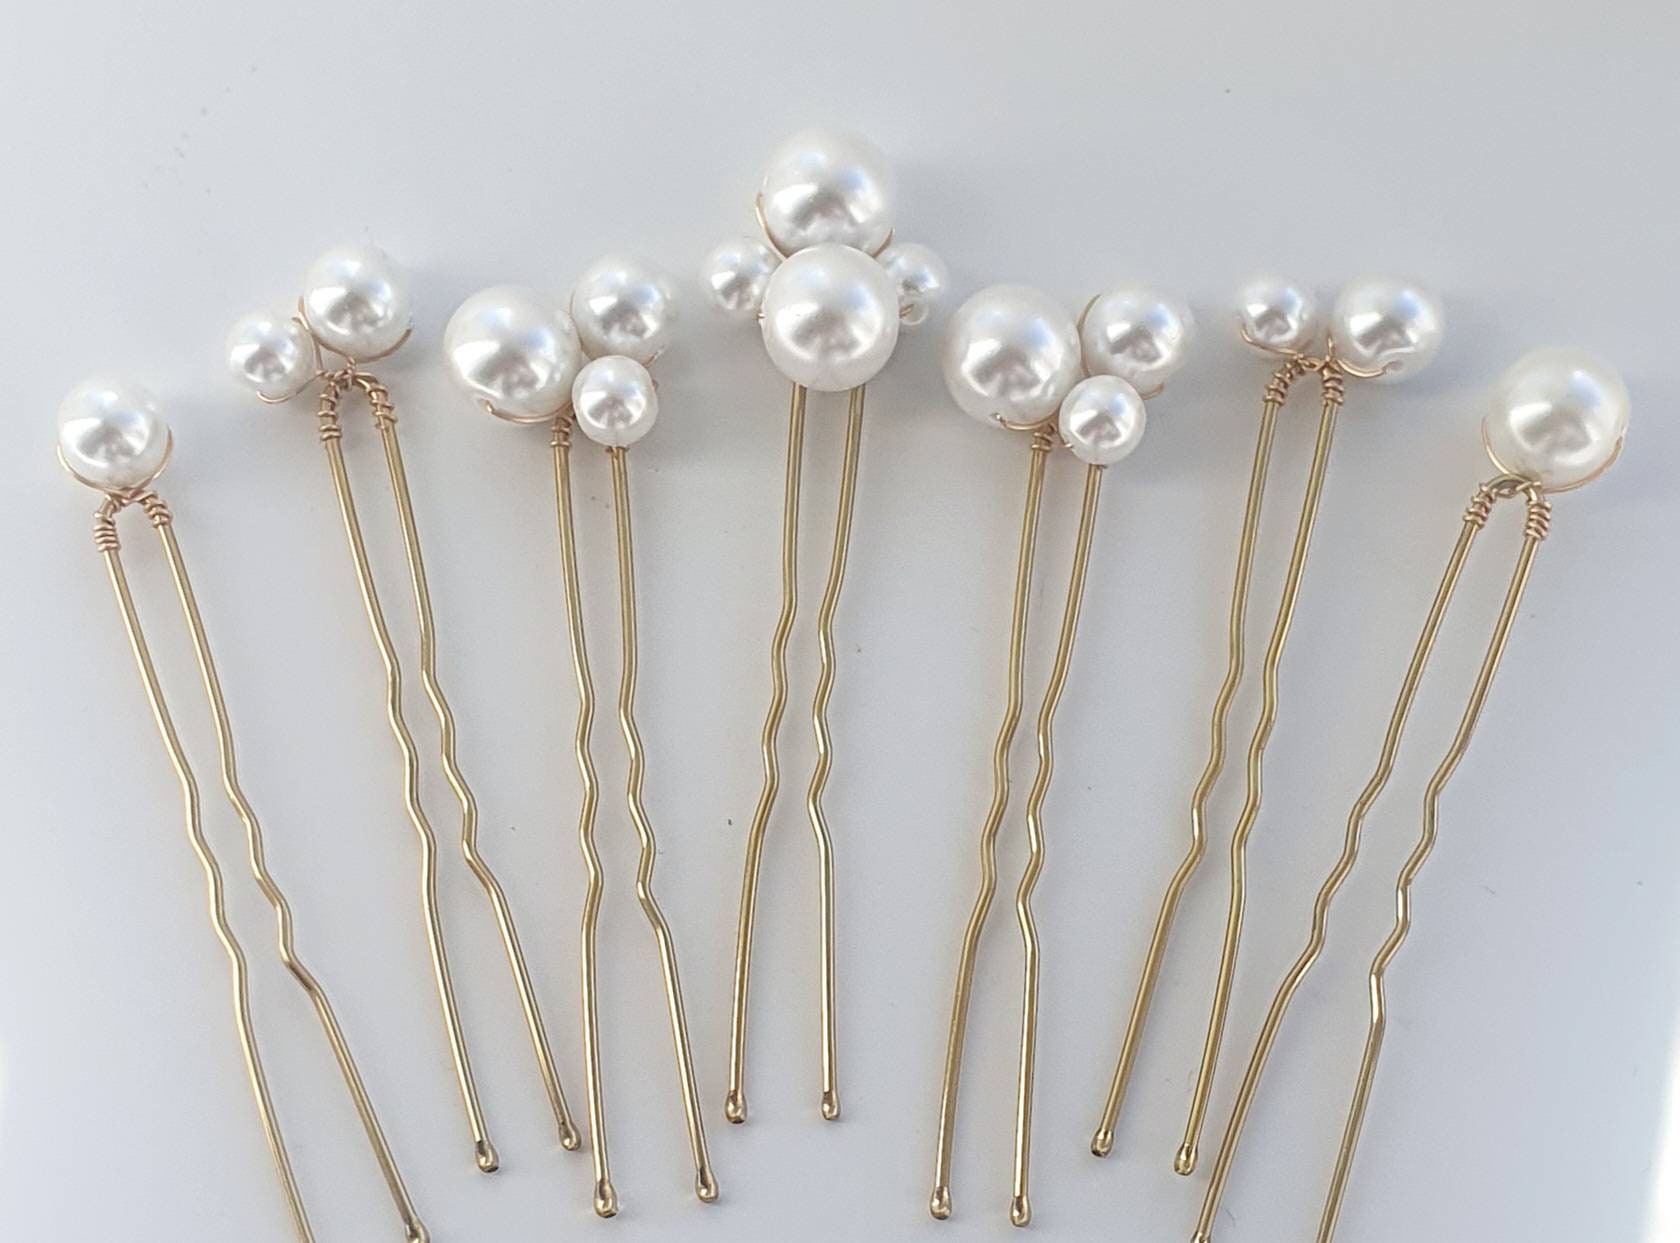 2 Corsage Pins Bouquet Pins White Pearl Pear Head 144 PCS High Quality by  Japaneses Manufacture 